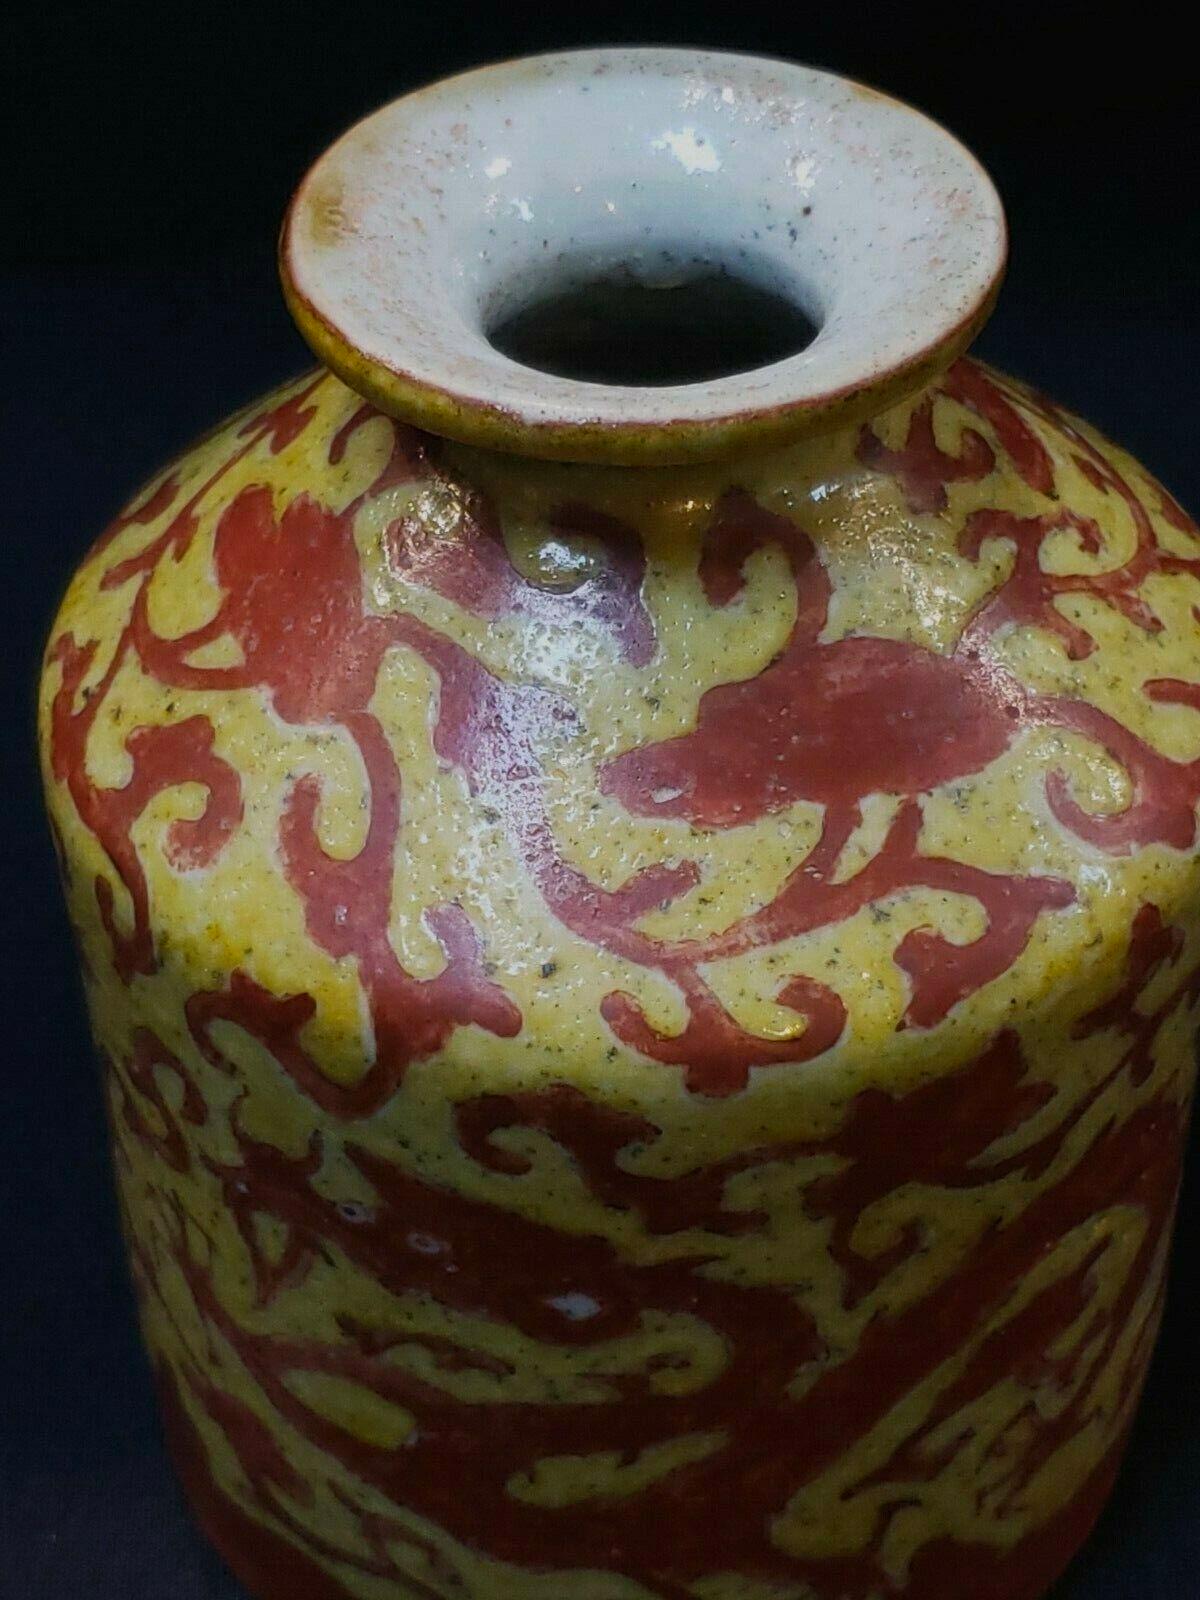 Ming, yellow glaze red dragon ornament pattern porcelain vase/ ?,???????(??)
Item measurement:H: 6 inch approximate W: 4 inch
Material: Yellow glaze porcelain 
Condition:As antique porcelain consider to be perfect condition,shows normal signs of